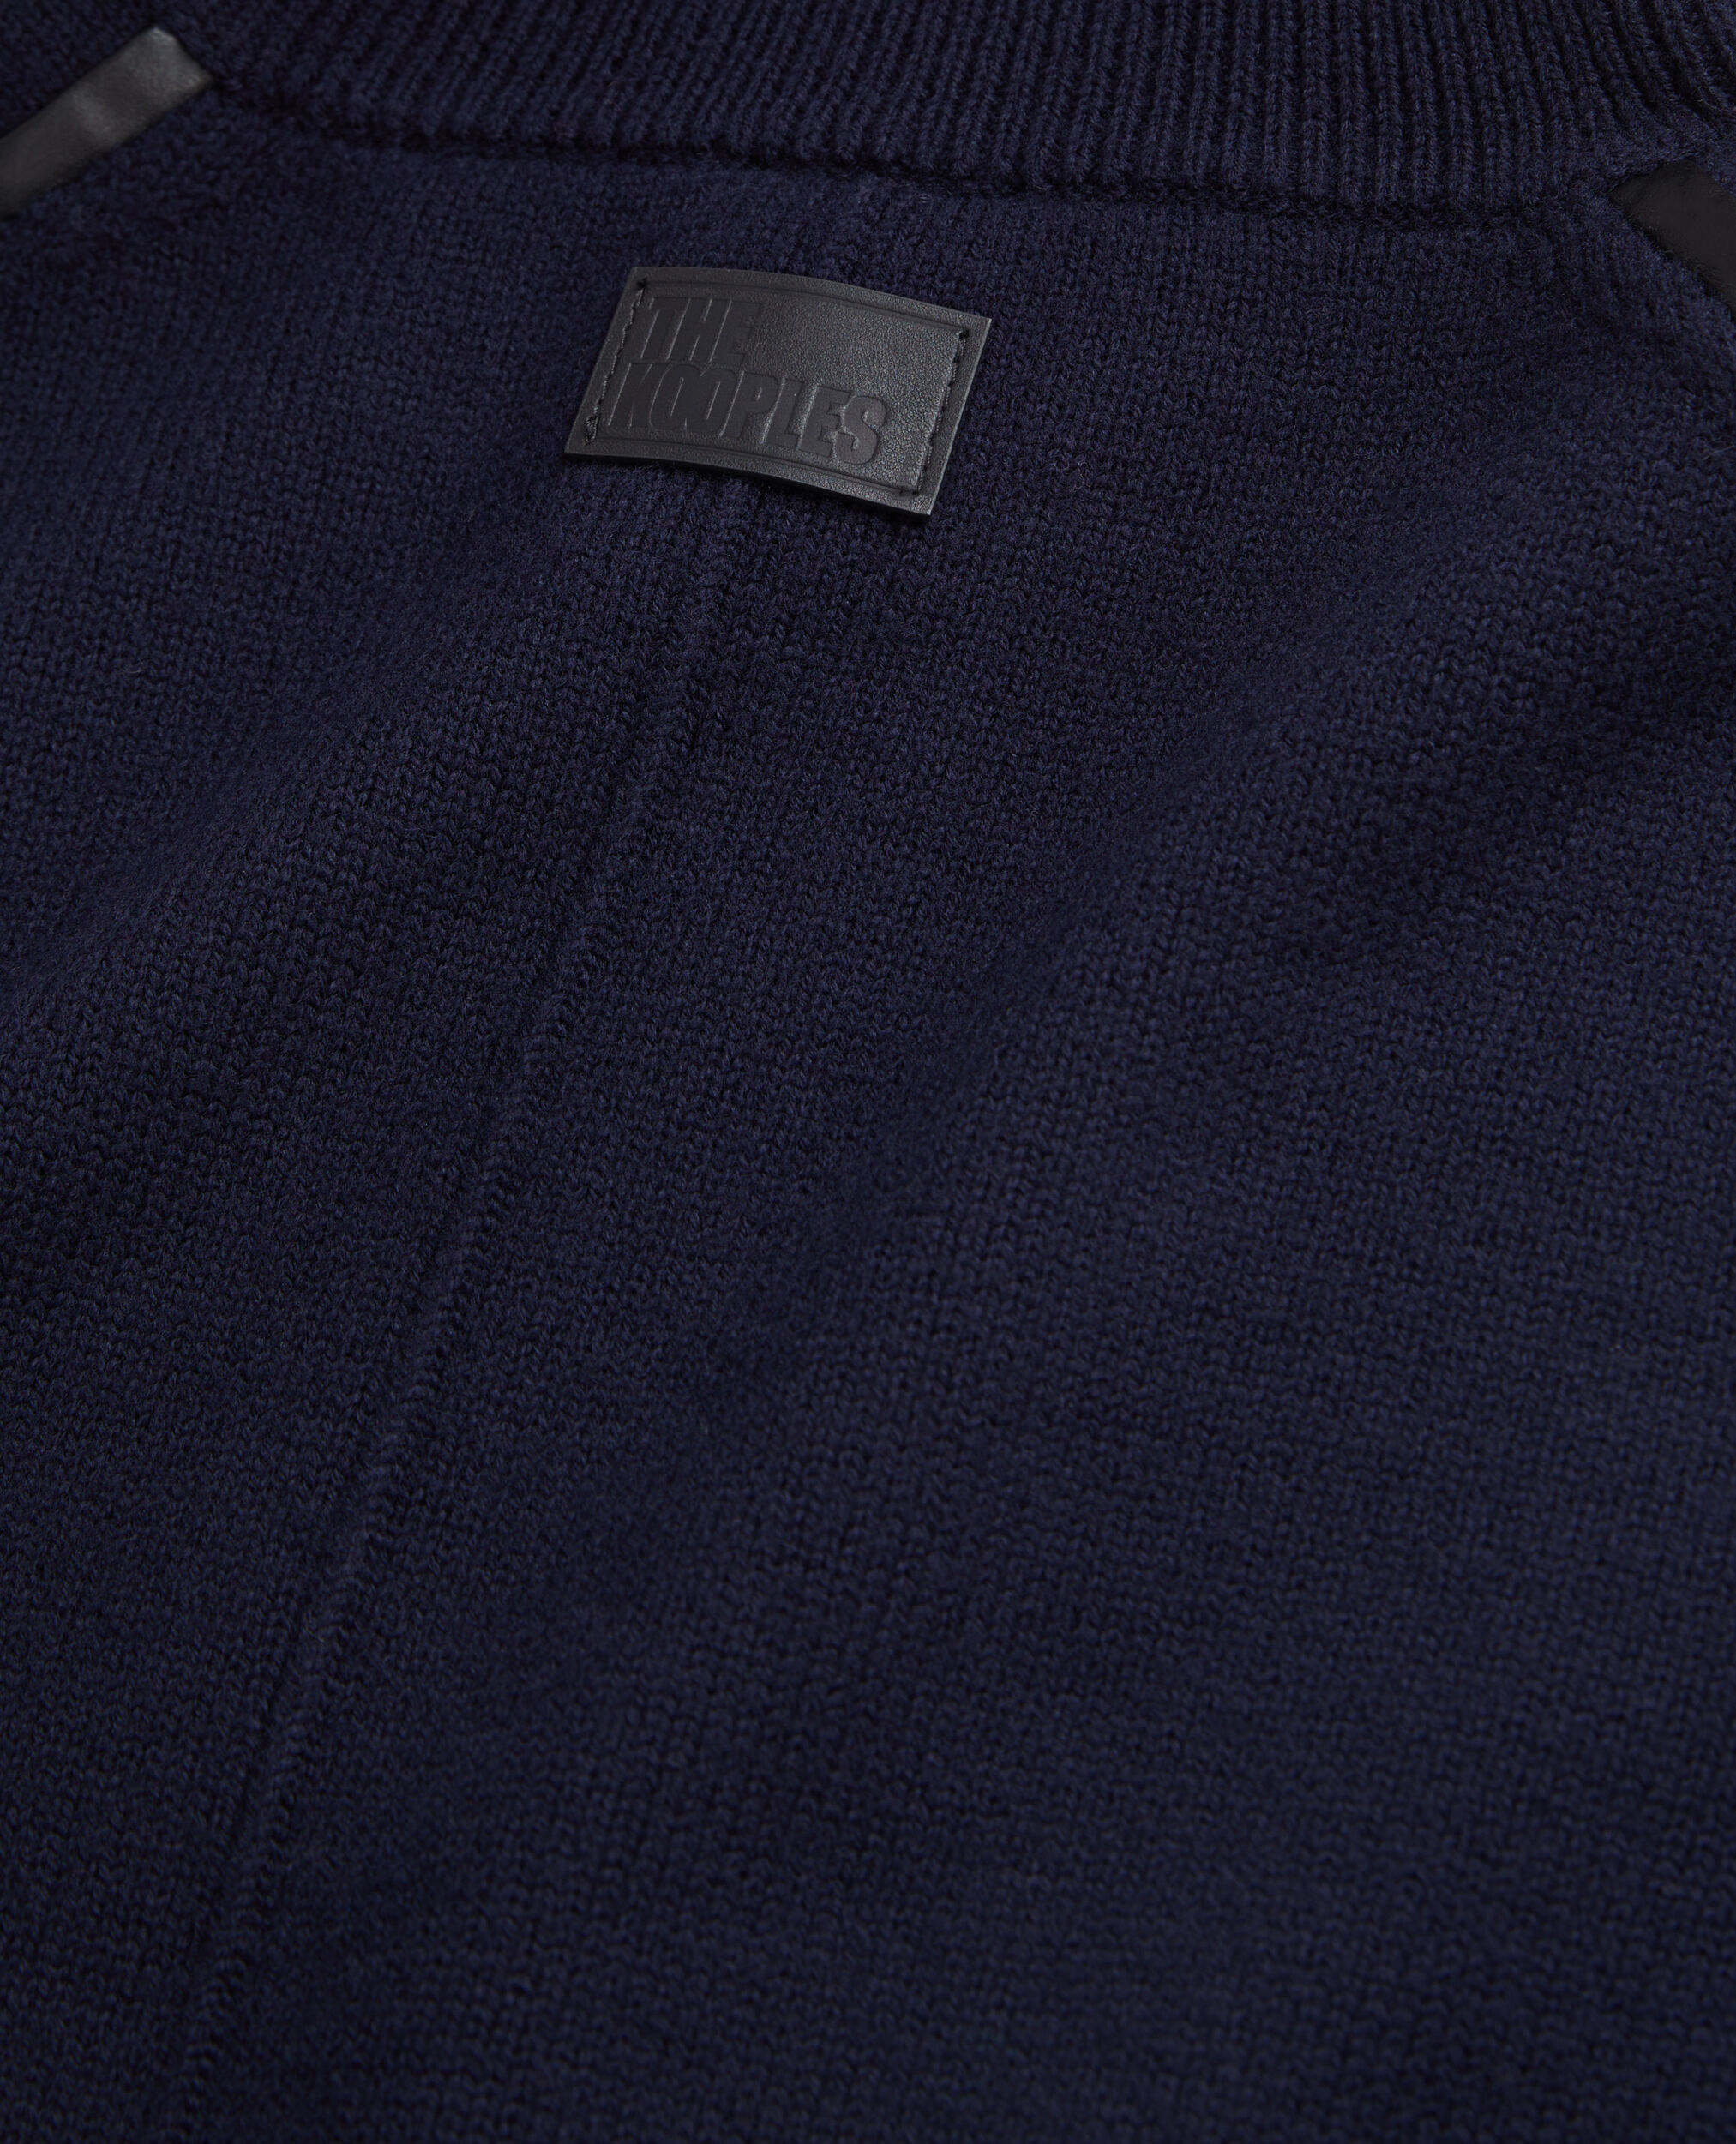 Marineblauer Pullover aus Wolle, NAVY, hi-res image number null